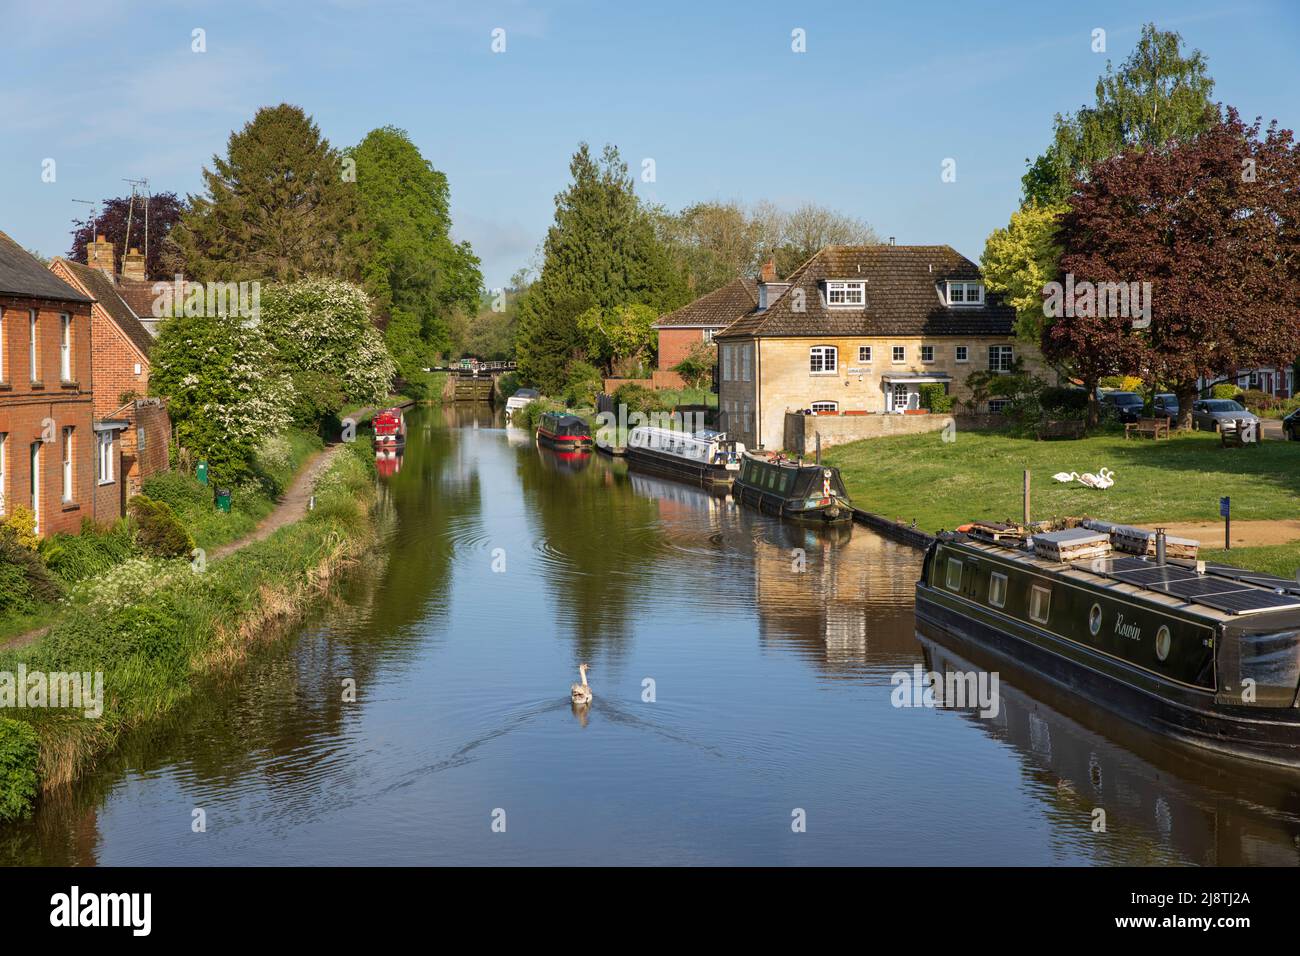 View along the Kennet and Avon canal looking west, Hungerford, West Berkshire, England, United Kingdom, Europe Stock Photo